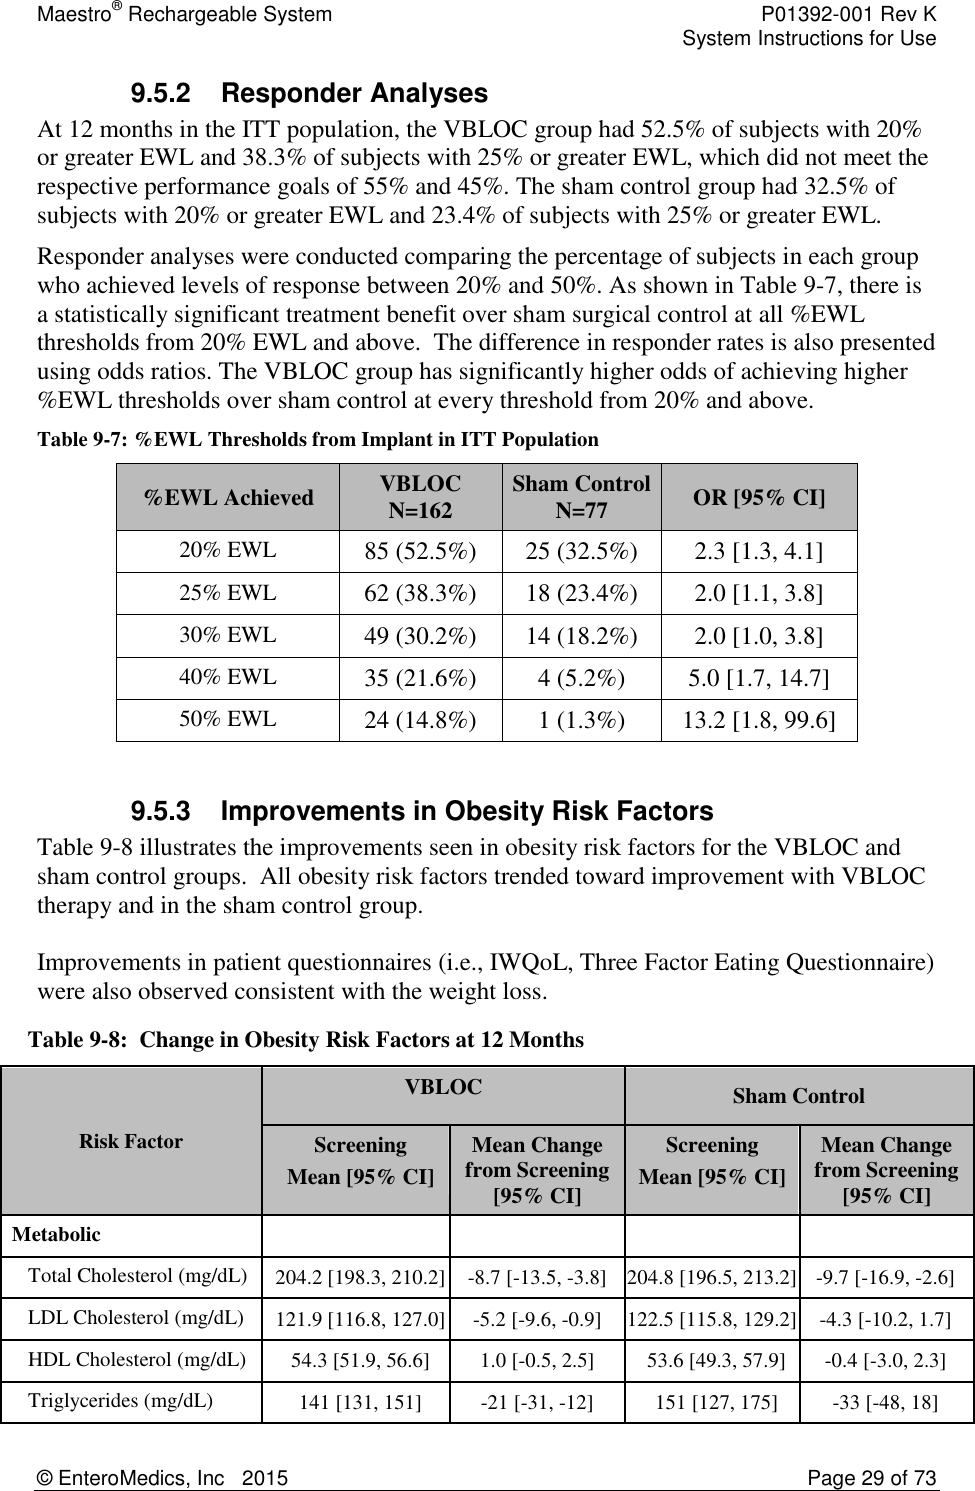 Maestro® Rechargeable System    P01392-001 Rev K     System Instructions for Use  © EnteroMedics, Inc   2015  Page 29 of 73  9.5.2  Responder Analyses At 12 months in the ITT population, the VBLOC group had 52.5% of subjects with 20% or greater EWL and 38.3% of subjects with 25% or greater EWL, which did not meet the respective performance goals of 55% and 45%. The sham control group had 32.5% of subjects with 20% or greater EWL and 23.4% of subjects with 25% or greater EWL. Responder analyses were conducted comparing the percentage of subjects in each group who achieved levels of response between 20% and 50%. As shown in Table 9-7, there is a statistically significant treatment benefit over sham surgical control at all %EWL thresholds from 20% EWL and above.  The difference in responder rates is also presented using odds ratios. The VBLOC group has significantly higher odds of achieving higher %EWL thresholds over sham control at every threshold from 20% and above.   Table 9-7: %EWL Thresholds from Implant in ITT Population %EWL Achieved VBLOC        N=162 Sham Control   N=77 OR [95% CI] 20% EWL 85 (52.5%) 25 (32.5%) 2.3 [1.3, 4.1] 25% EWL 62 (38.3%) 18 (23.4%) 2.0 [1.1, 3.8] 30% EWL 49 (30.2%) 14 (18.2%) 2.0 [1.0, 3.8] 40% EWL 35 (21.6%) 4 (5.2%) 5.0 [1.7, 14.7] 50% EWL 24 (14.8%) 1 (1.3%) 13.2 [1.8, 99.6]  9.5.3  Improvements in Obesity Risk Factors Table 9-8 illustrates the improvements seen in obesity risk factors for the VBLOC and sham control groups.  All obesity risk factors trended toward improvement with VBLOC therapy and in the sham control group.  Improvements in patient questionnaires (i.e., IWQoL, Three Factor Eating Questionnaire) were also observed consistent with the weight loss.  Table 9-8:  Change in Obesity Risk Factors at 12 Months   Risk Factor VBLOC Sham Control Screening Mean [95% CI] Mean Change from Screening [95% CI] Screening Mean [95% CI] Mean Change from Screening [95% CI] Metabolic      Total Cholesterol (mg/dL) 204.2 [198.3, 210.2] -8.7 [-13.5, -3.8] 204.8 [196.5, 213.2] -9.7 [-16.9, -2.6] LDL Cholesterol (mg/dL) 121.9 [116.8, 127.0] -5.2 [-9.6, -0.9] 122.5 [115.8, 129.2] -4.3 [-10.2, 1.7] HDL Cholesterol (mg/dL) 54.3 [51.9, 56.6] 1.0 [-0.5, 2.5] 53.6 [49.3, 57.9] -0.4 [-3.0, 2.3] Triglycerides (mg/dL) 141 [131, 151] -21 [-31, -12] 151 [127, 175] -33 [-48, 18] 